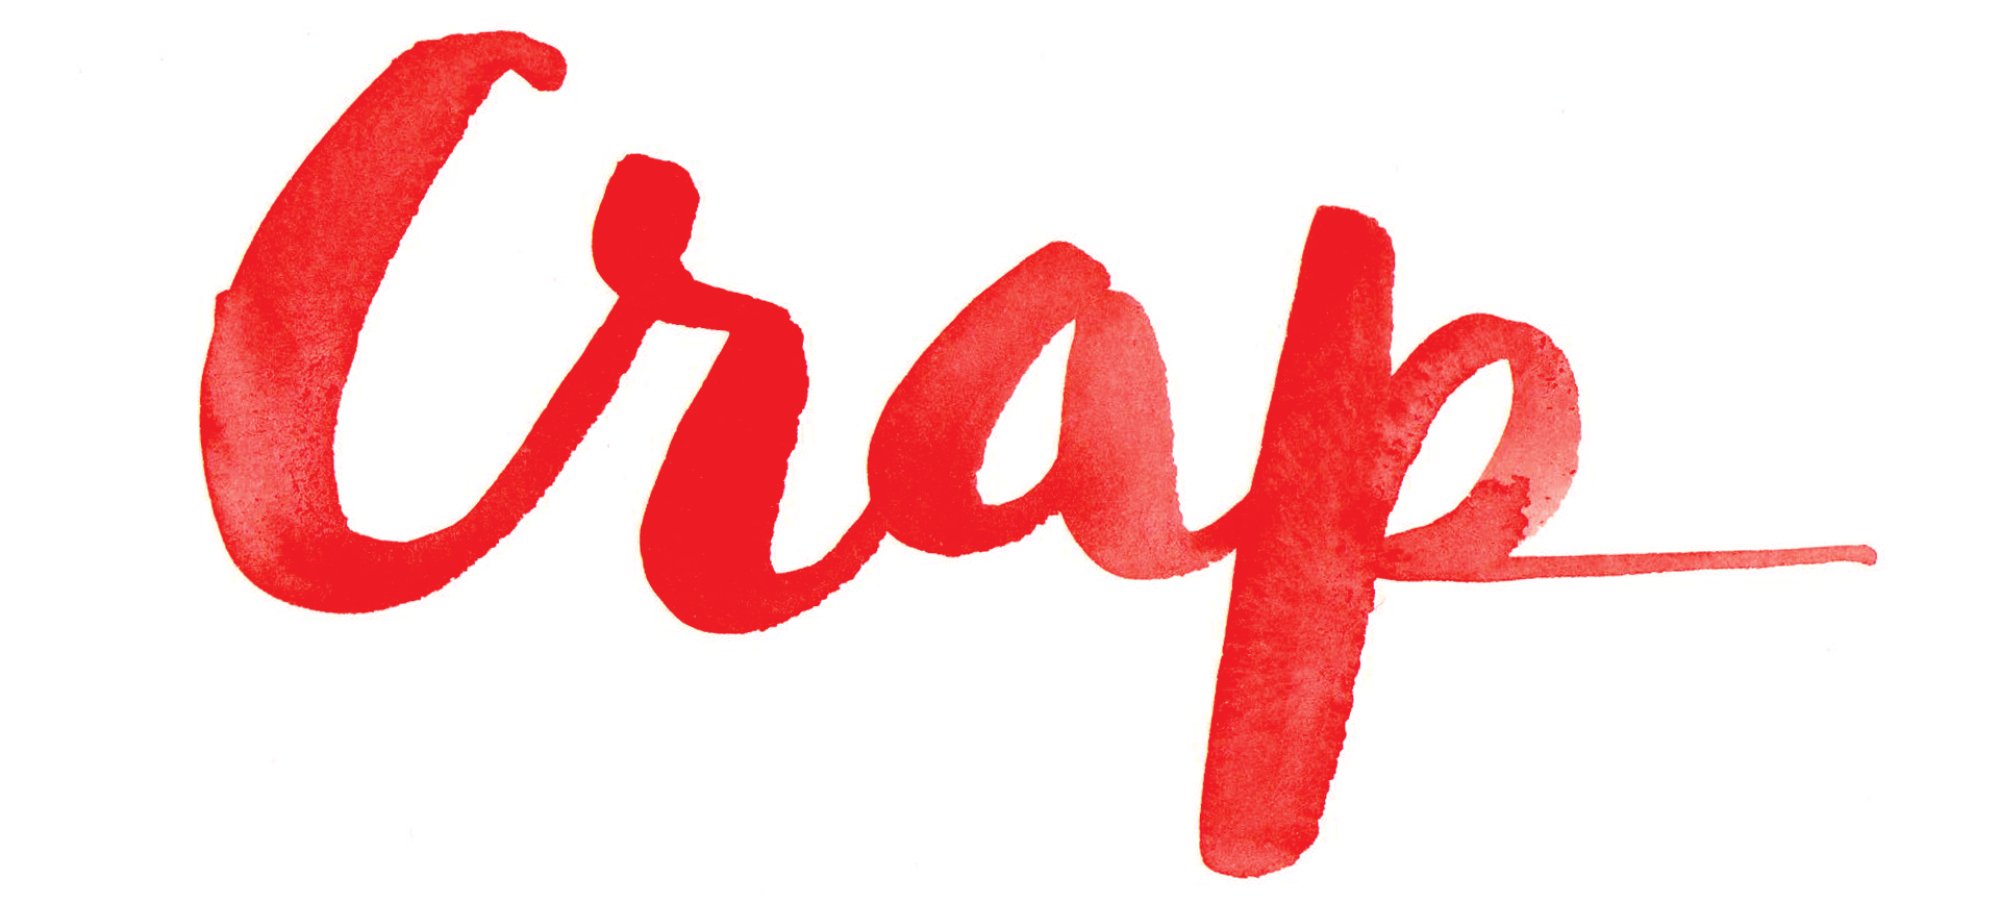 The word "crap" in red cursive lettering.